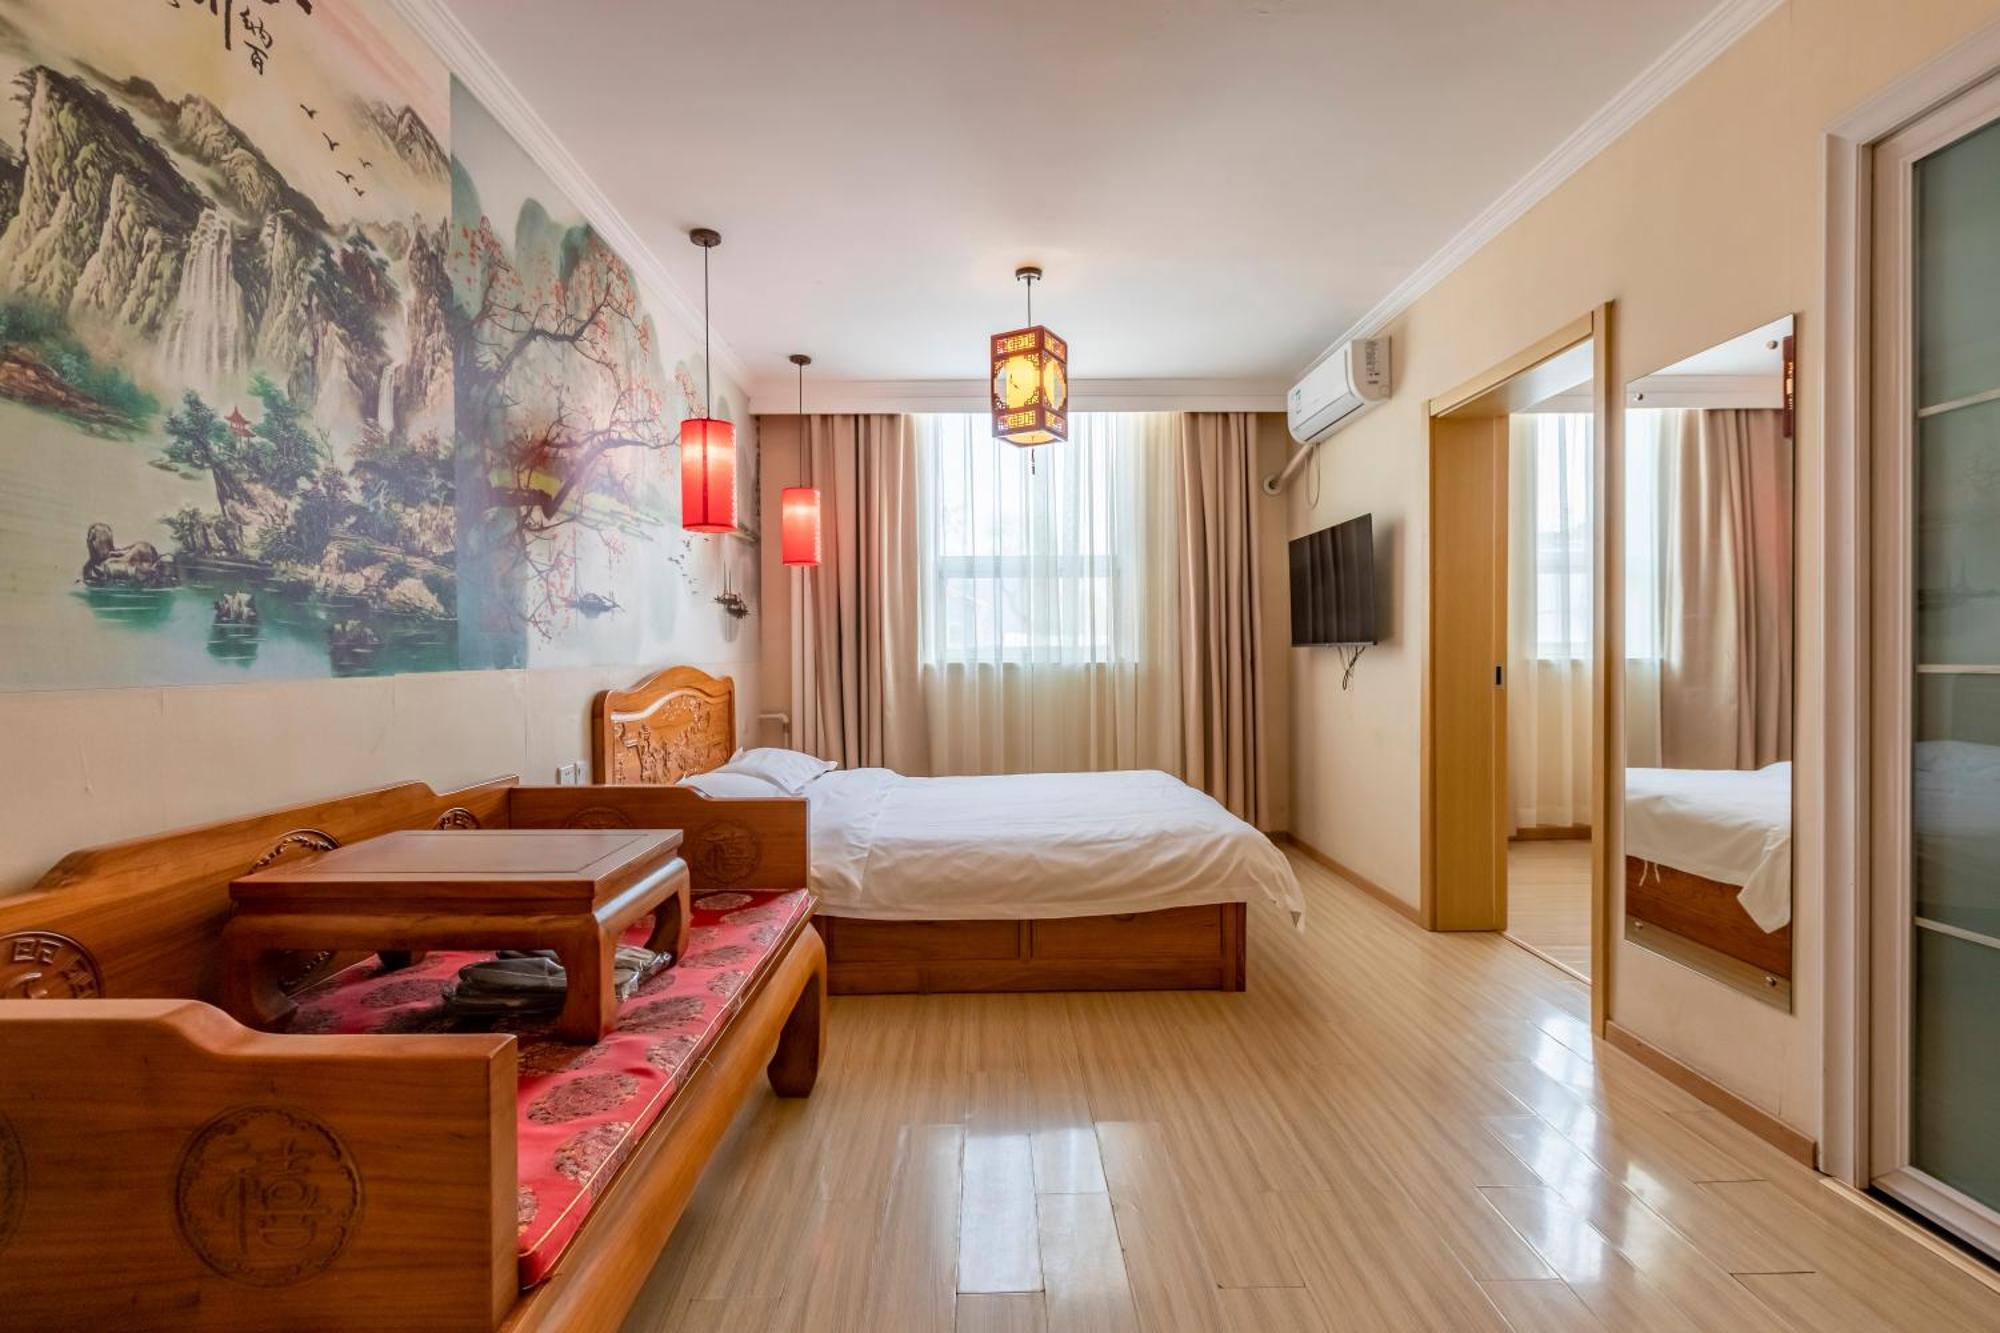 Happy Dragon City Center Alley Hotel -In The City Center With Big Window&Heater, Ticket Service&Free Coffee&Food Recommendation,Near Tian Anmen Forbiddencity,Easy To Get Traditional Walking Area&Shichahai Peking Kültér fotó